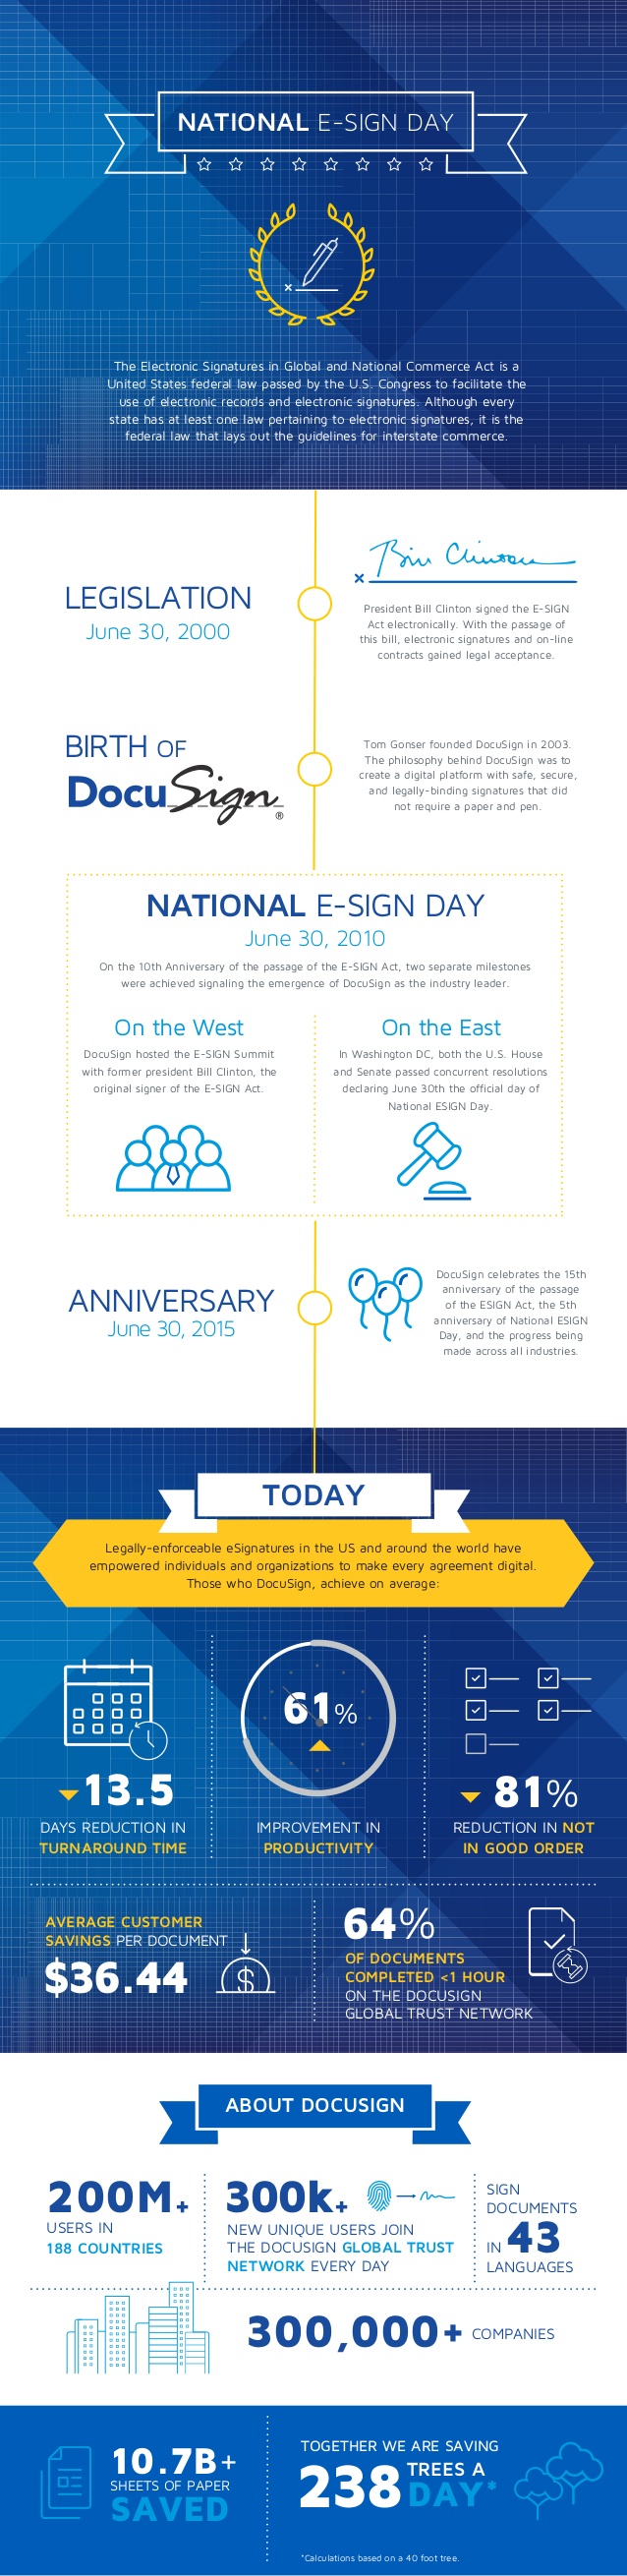 docusign national esign day 2017 infographic